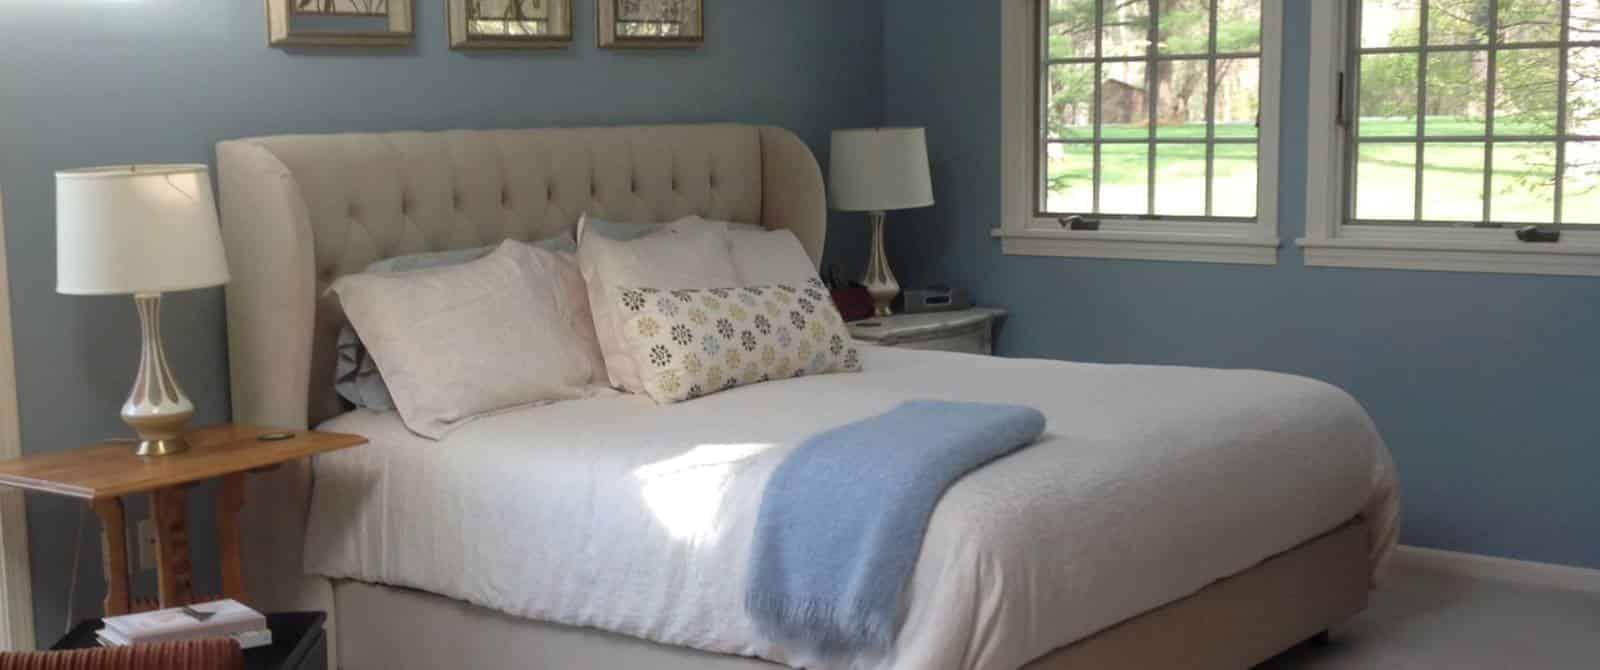 Bedroom with blue walls, white trim, upholstered headboard, white bedding, and multiple windows